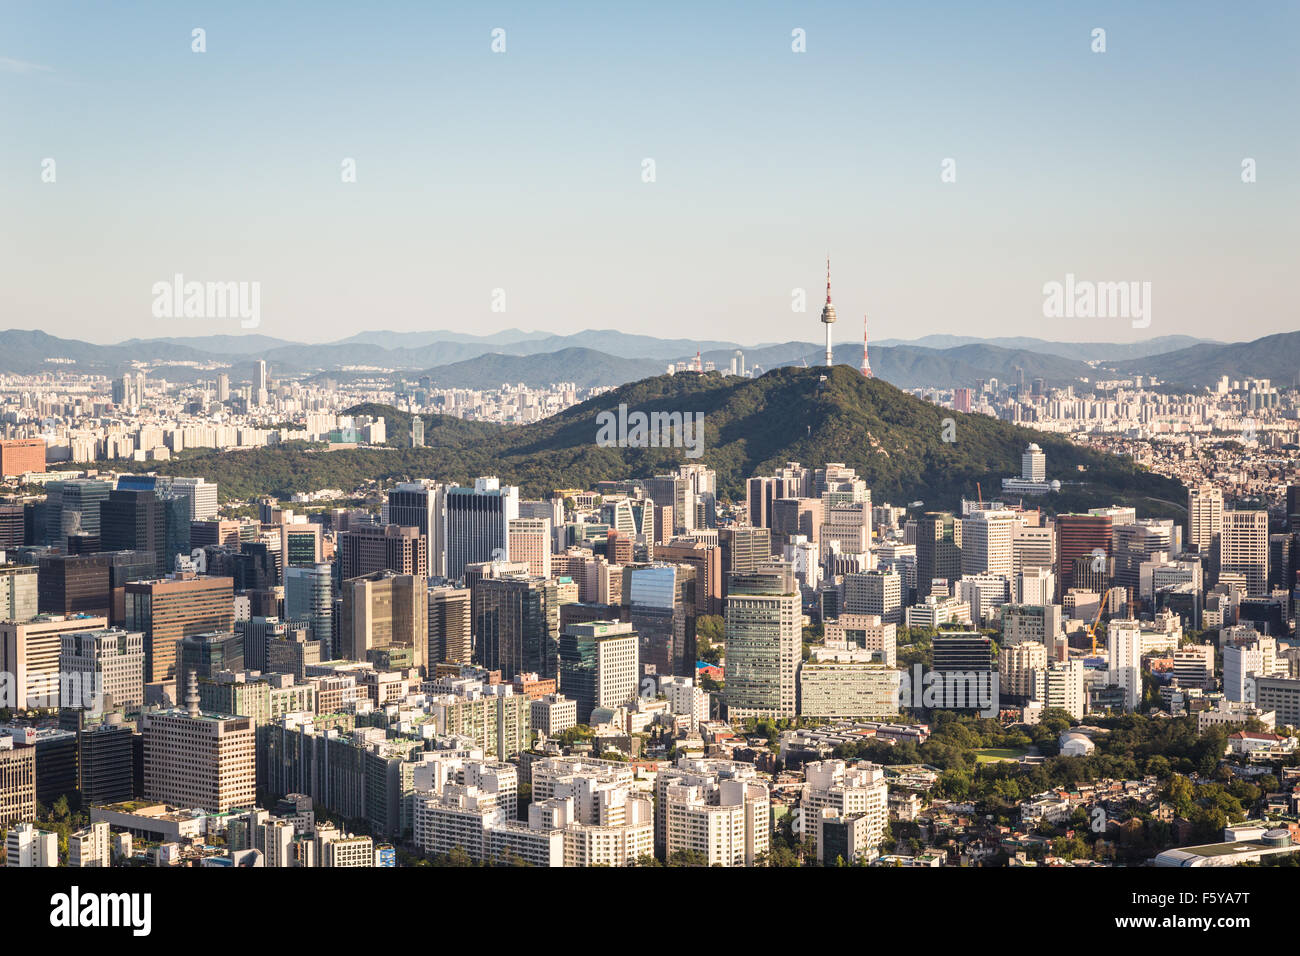 An aerial view of Seoul, South Korea capital city with the Namsan mountain in the middle of the city business district. Stock Photo